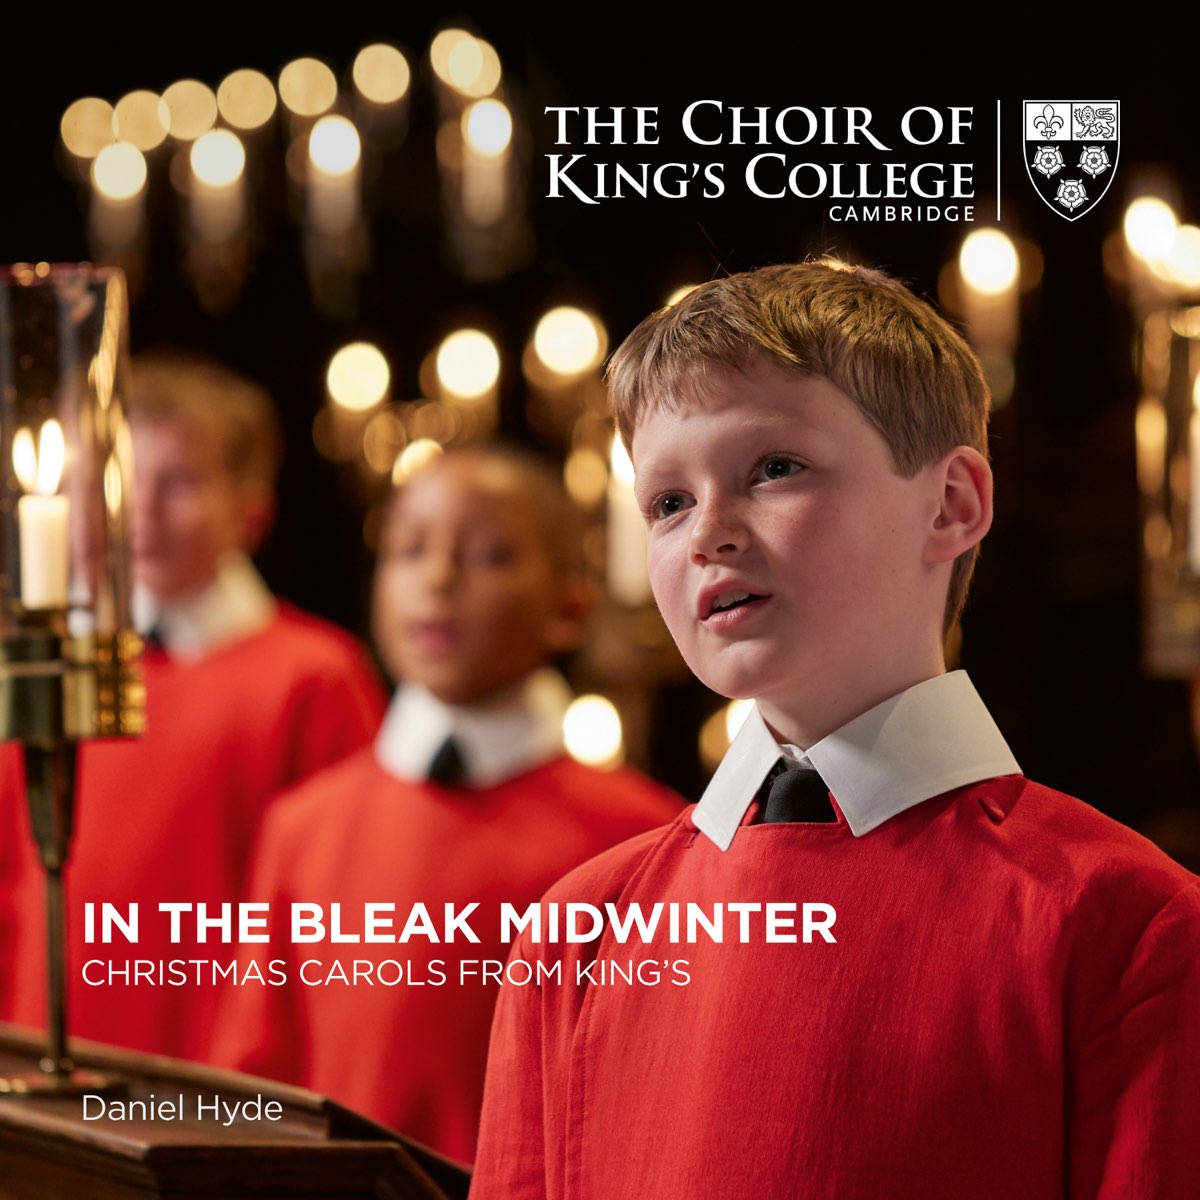 ‎In the Bleak Midwinter Christmas Carols from King's by The Choir of